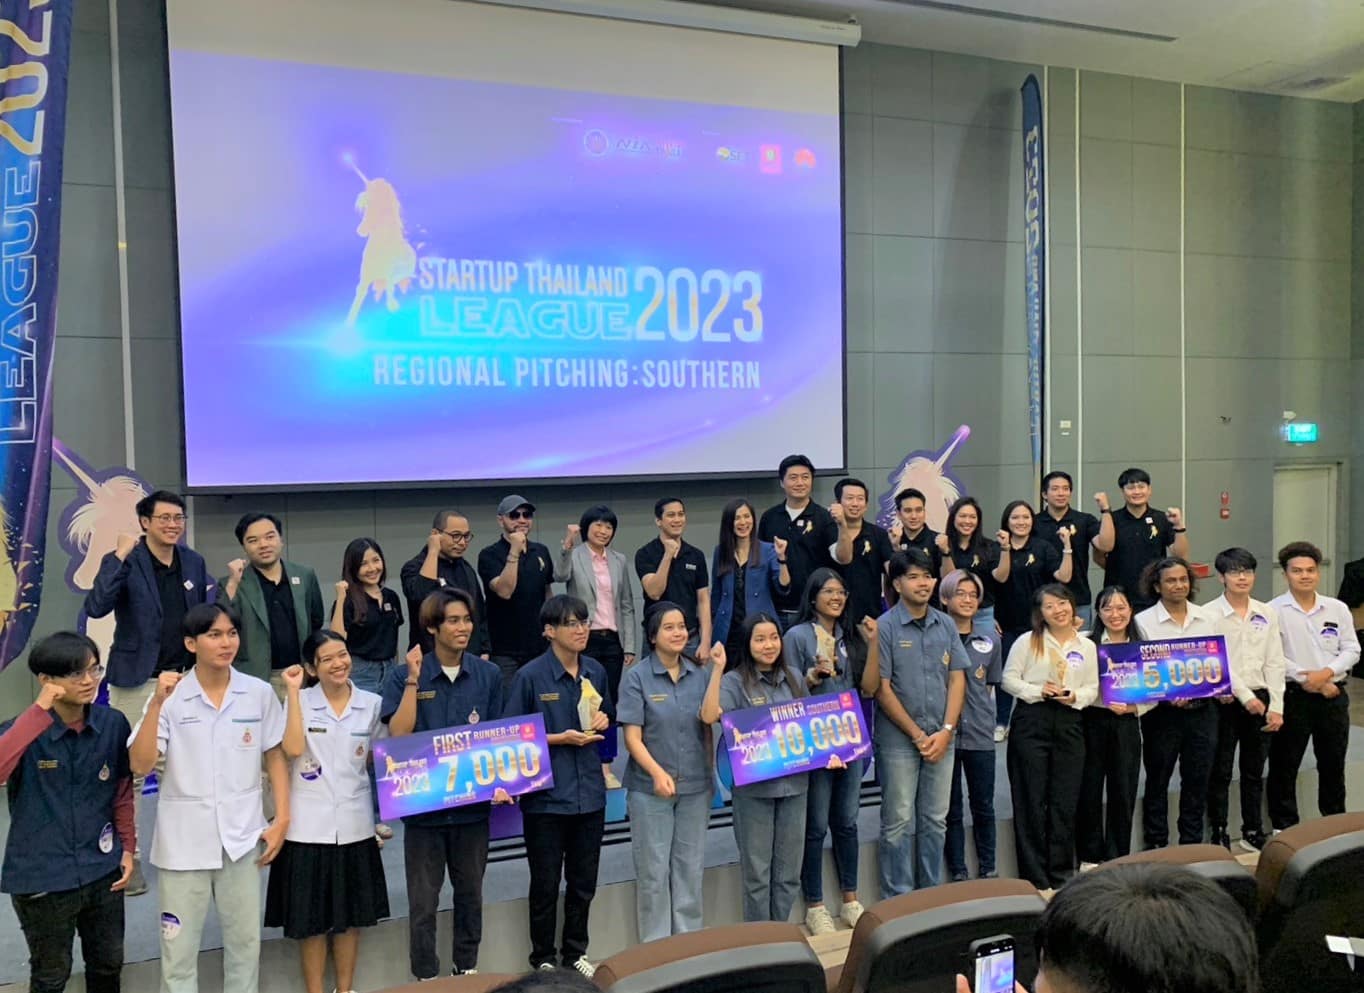 Congratulations Aroimak Team from WUIC Triumphs as 2nd Runner Up! from 'Startup Thailand League 2023: National Pitching'